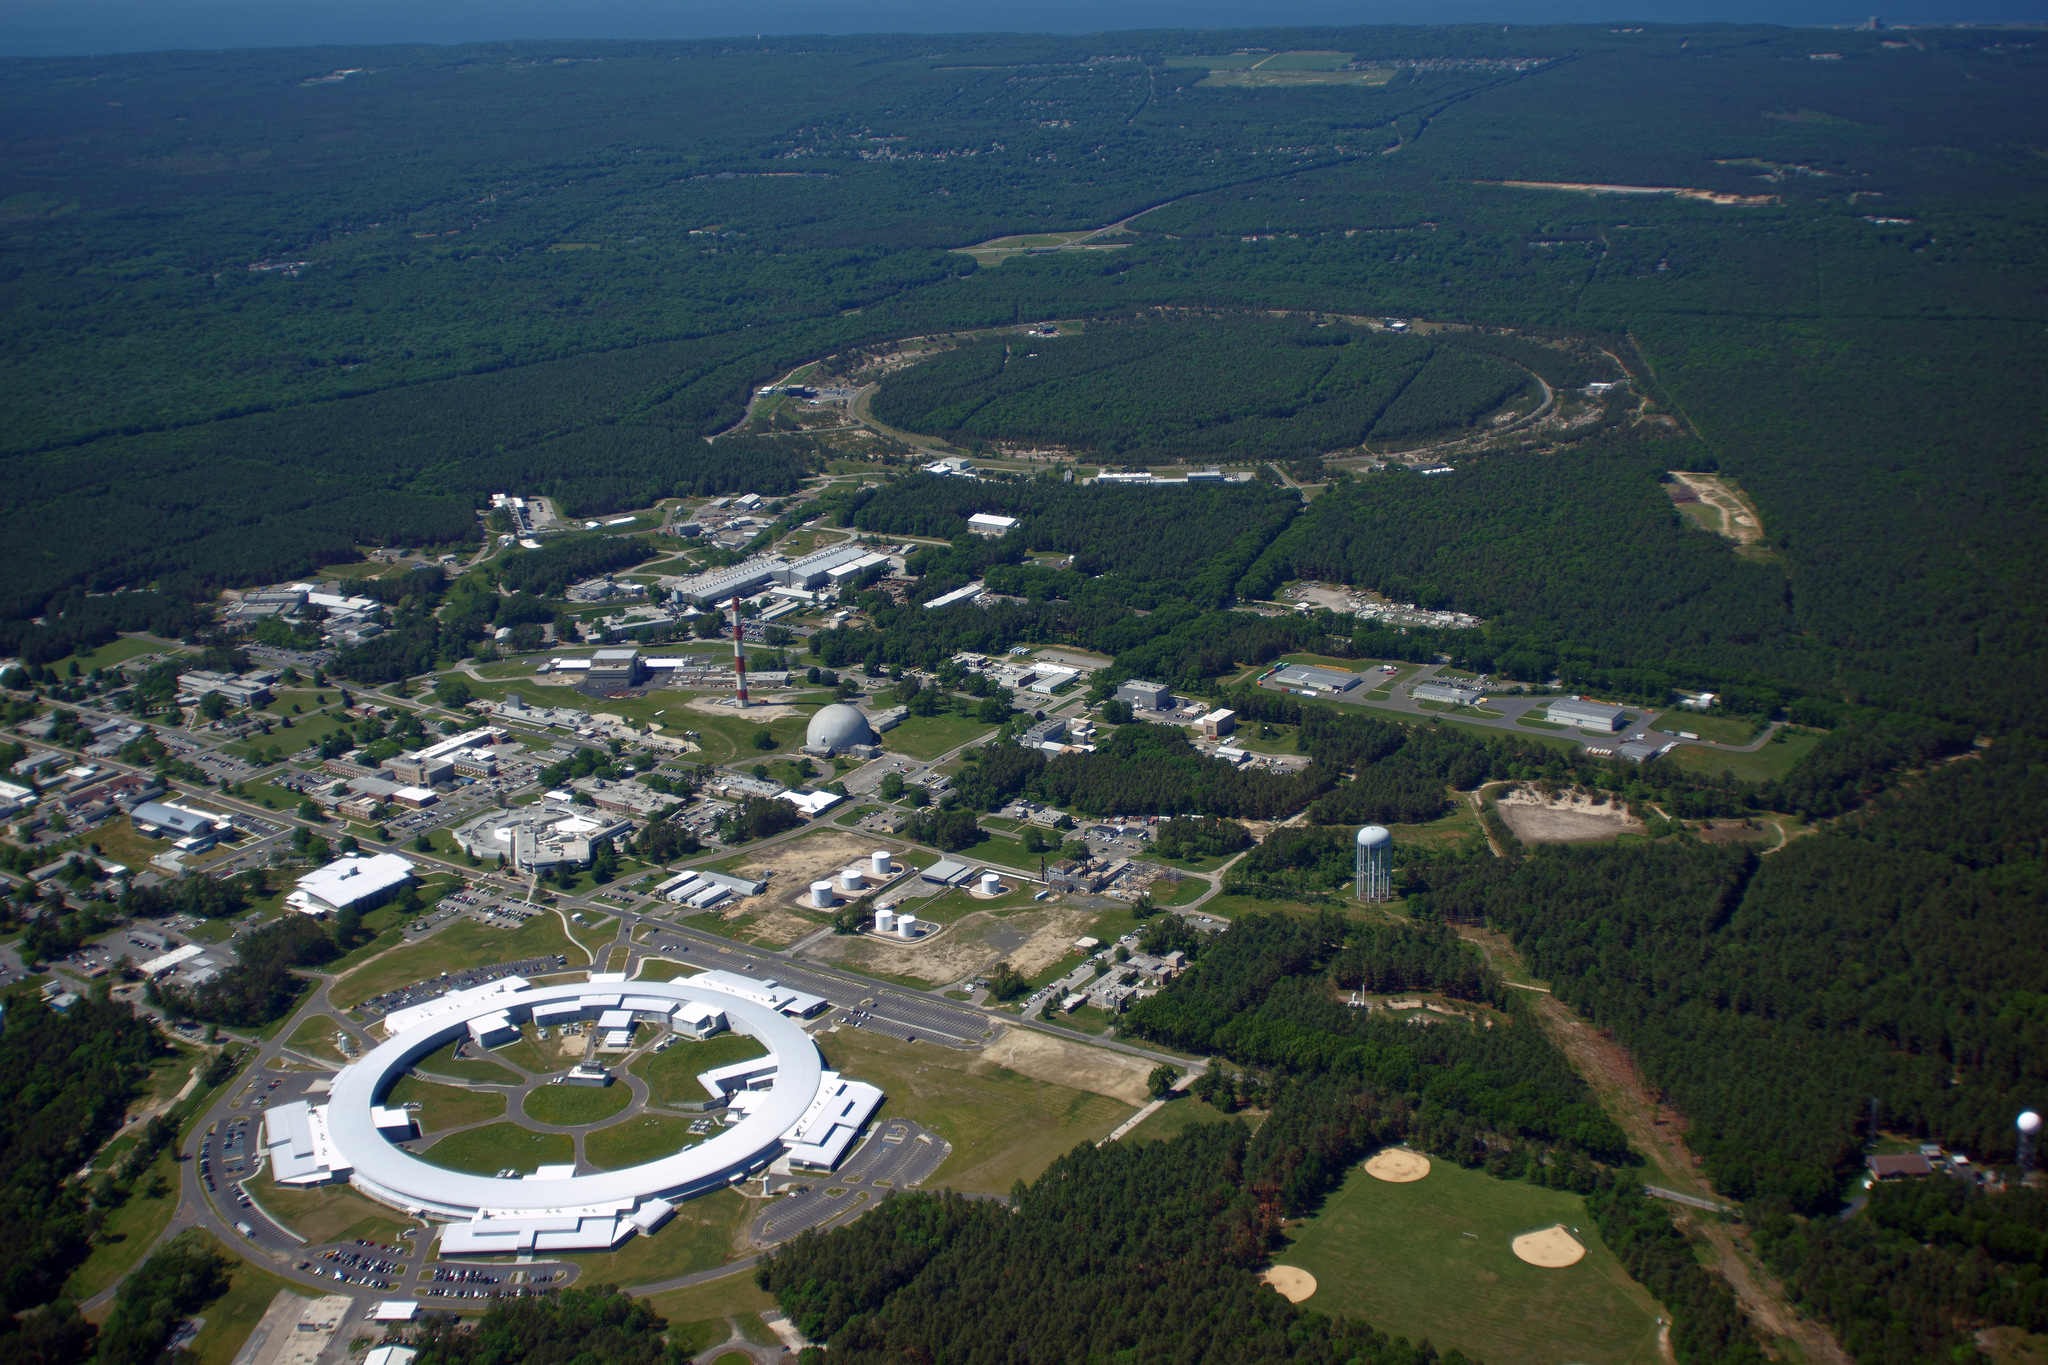 National Synchrotron Light Source II, Brookhaven National Lab - A New  Source to Power New Research 